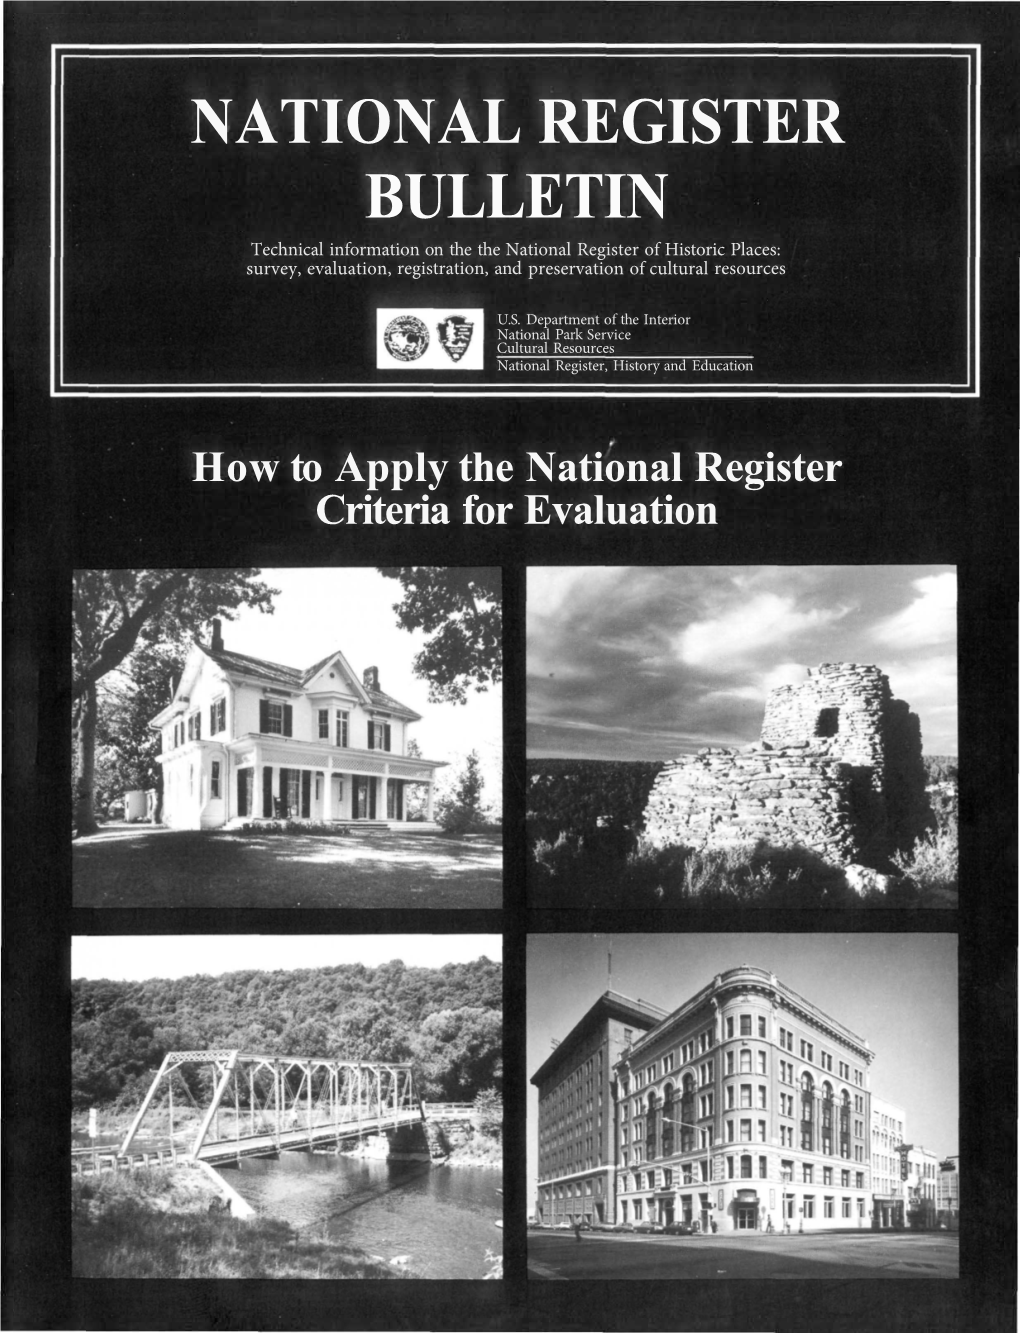 How to Apply the National Register Criteria for Evaluation